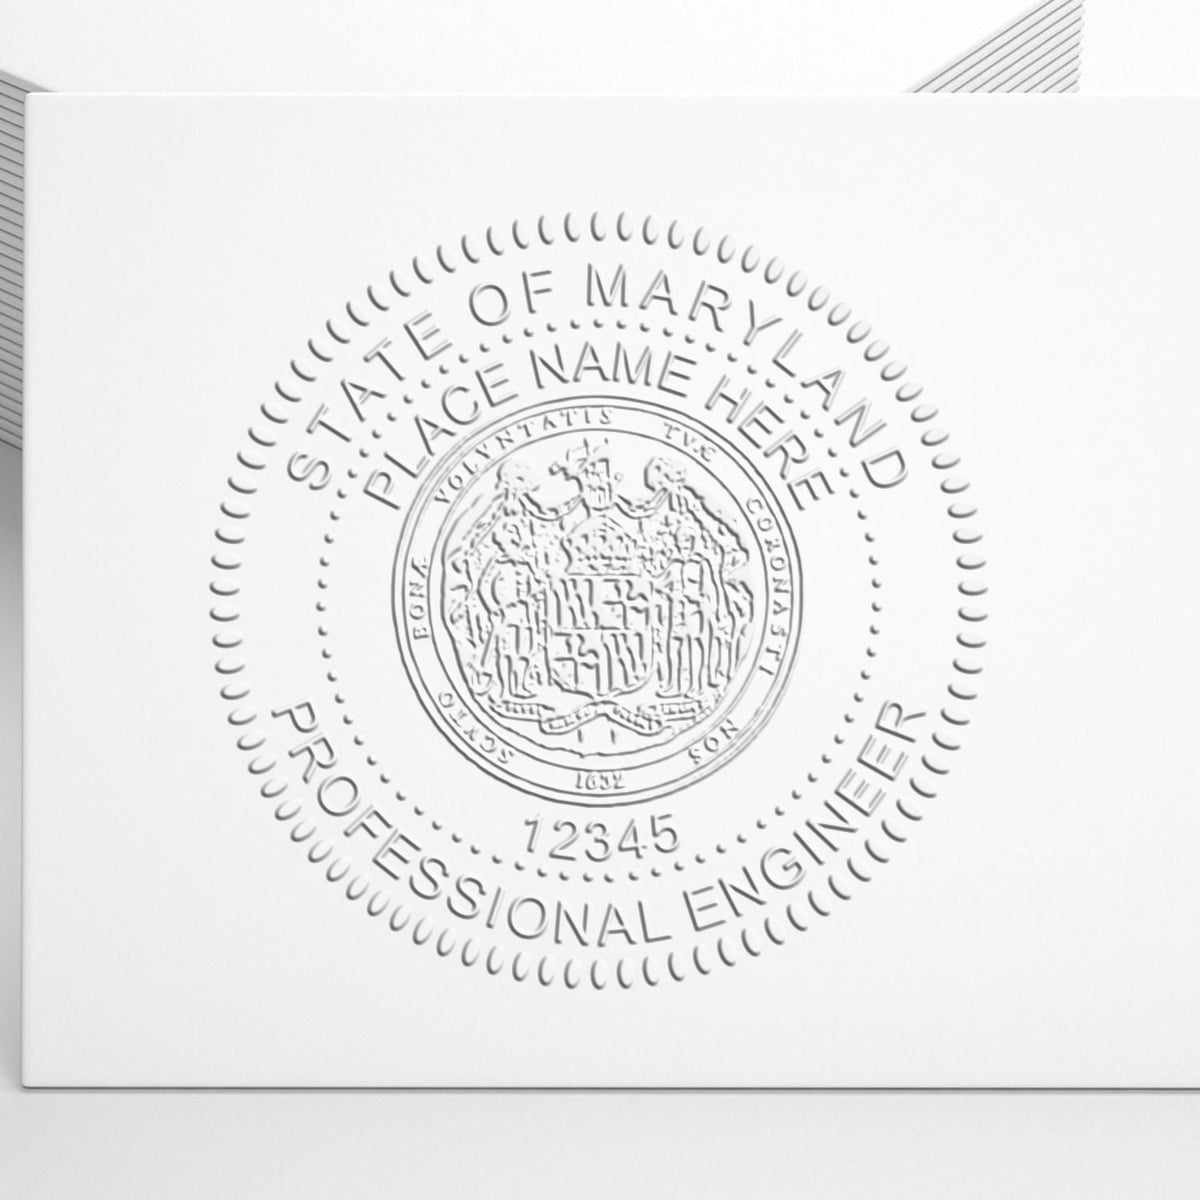 The Heavy Duty Cast Iron Maryland Engineer Seal Embosser stamp impression comes to life with a crisp, detailed photo on paper - showcasing true professional quality.